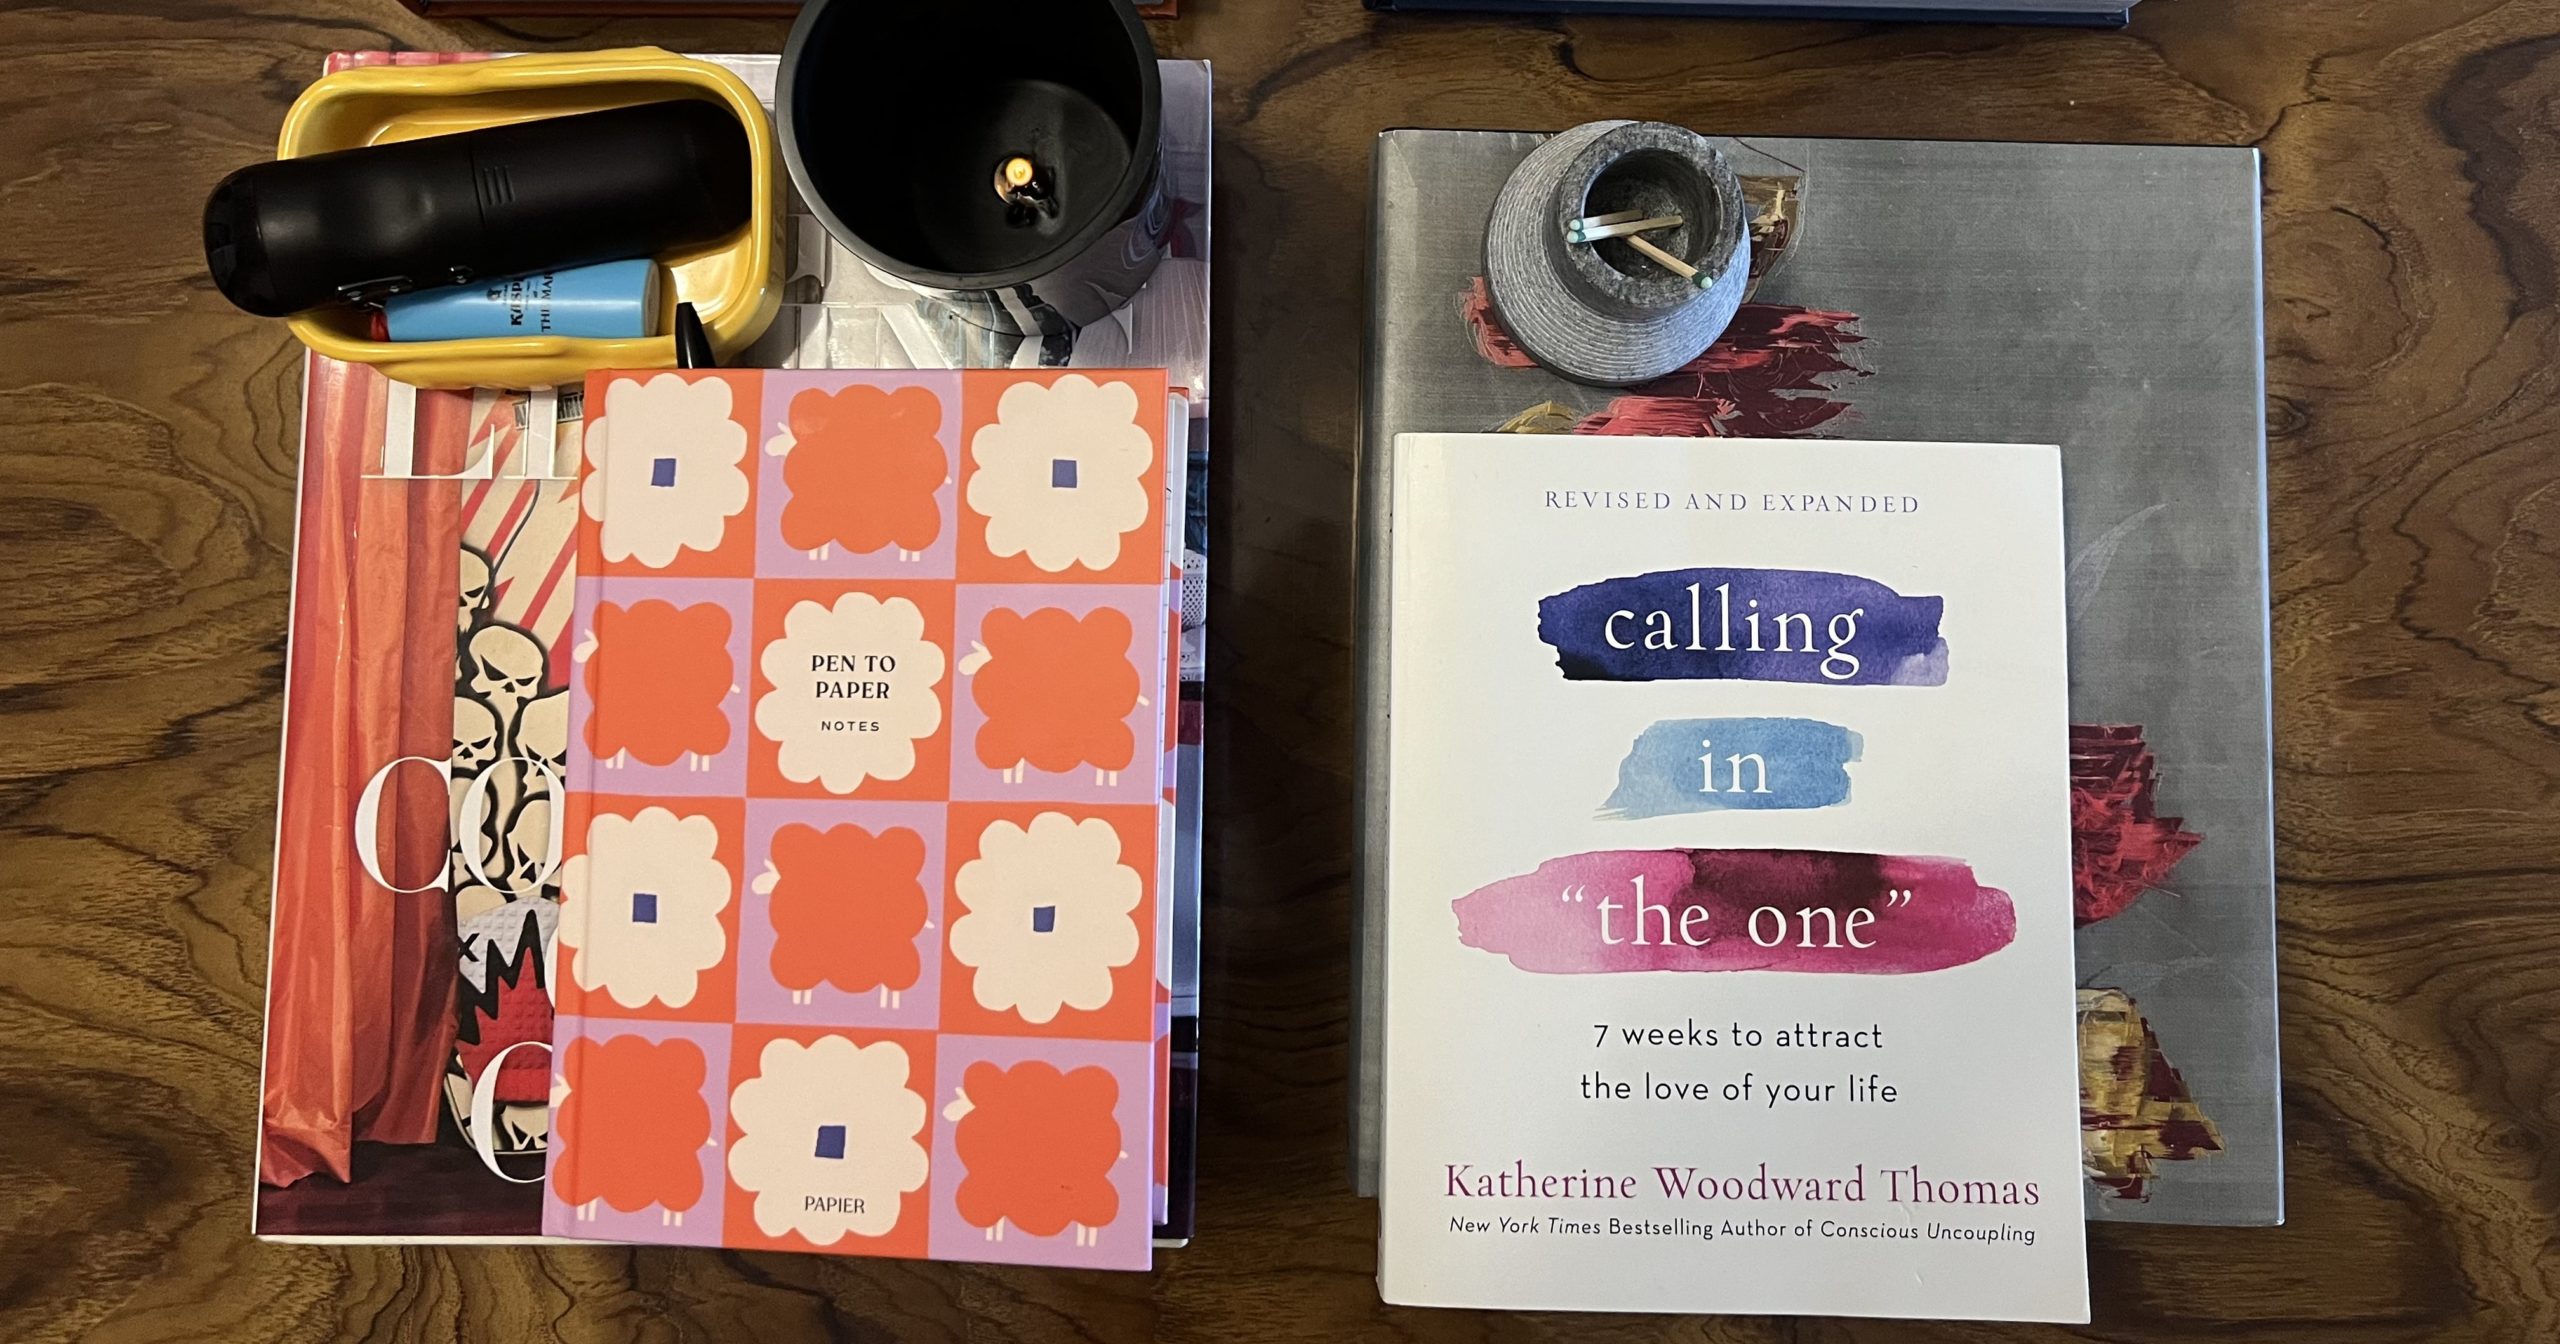 I Tried the 7-Week “Calling in ‘The One'” Dating Method